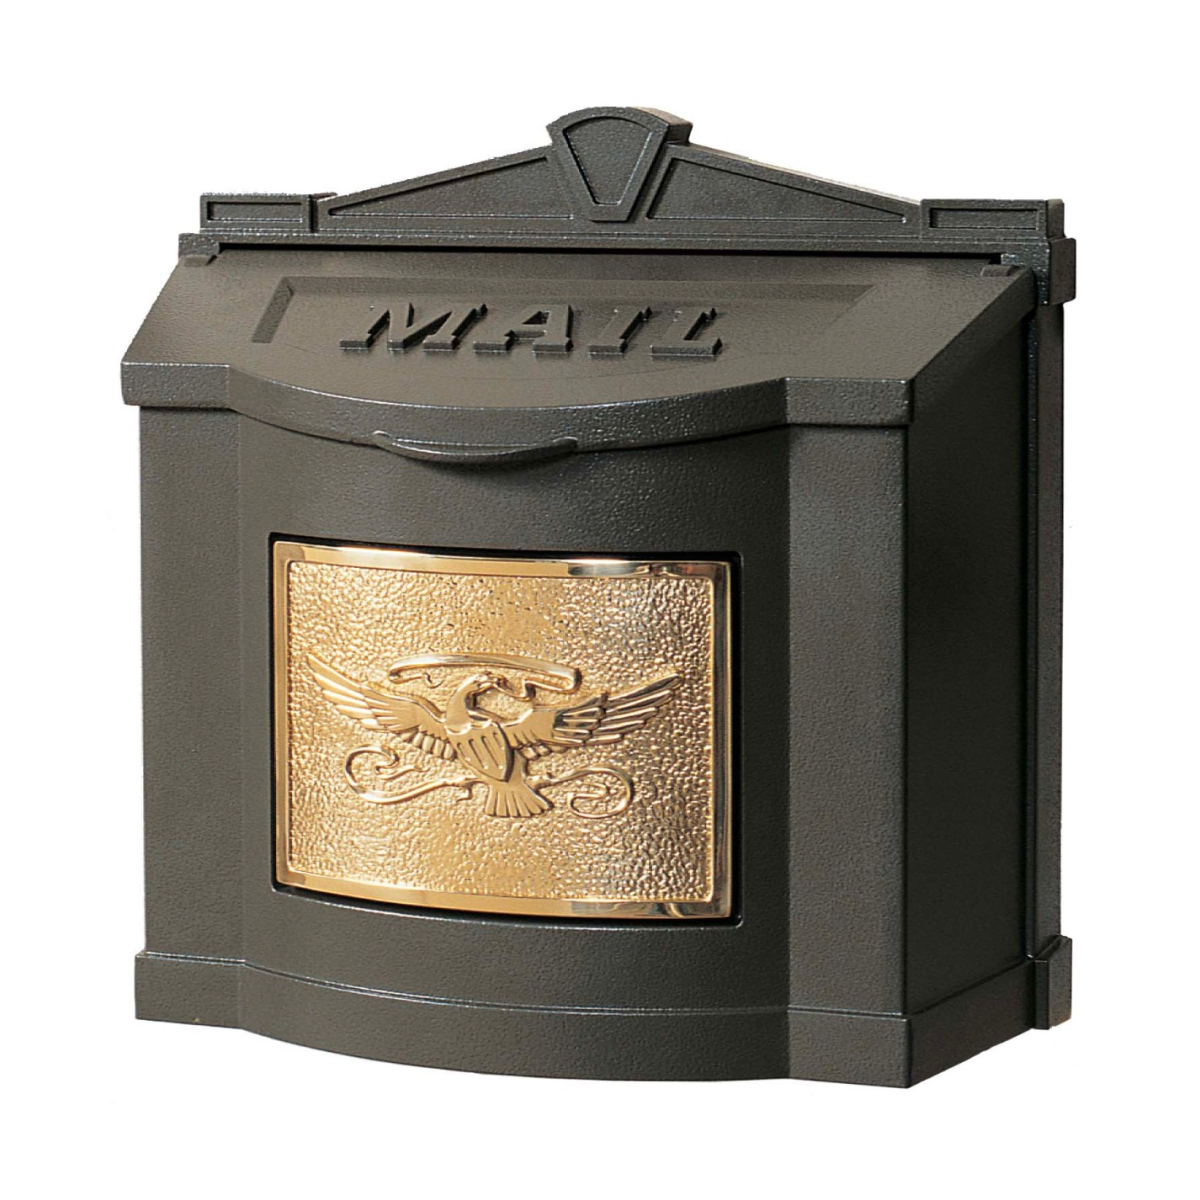 Gaines Eagle Wall Mount Mailbox Product Image